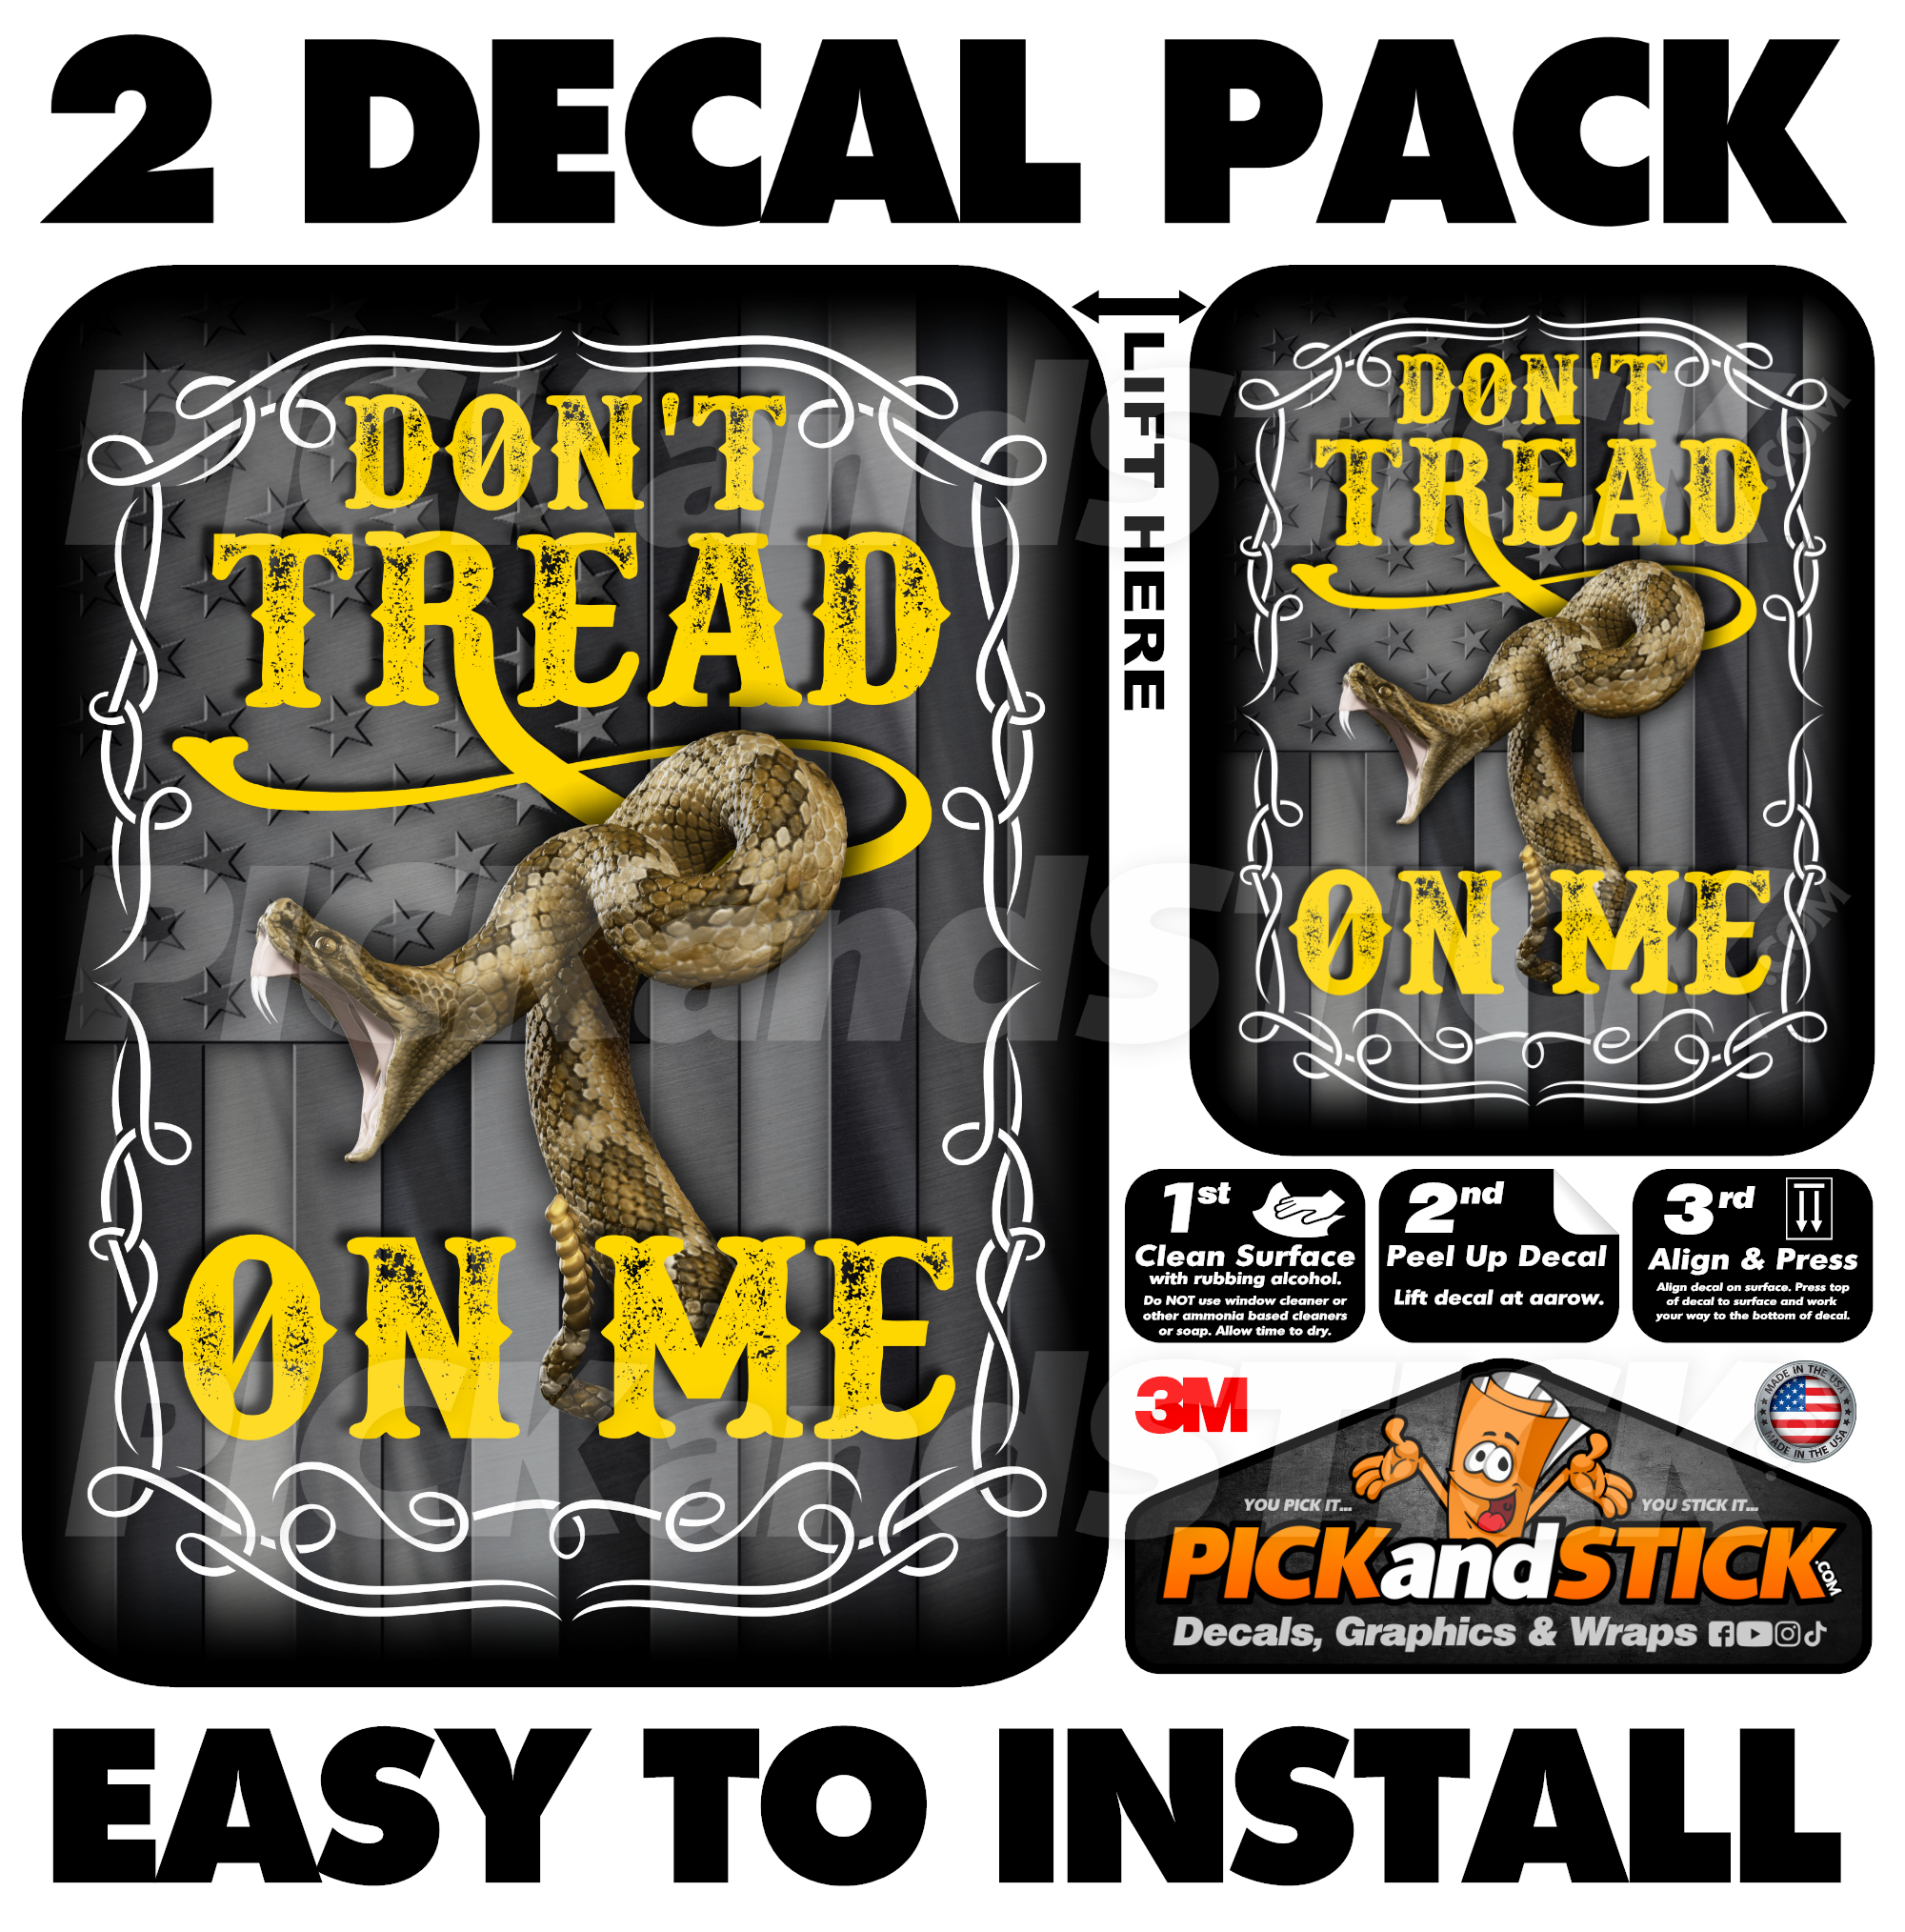 Don't Tread On Me - 2 Decal Pack